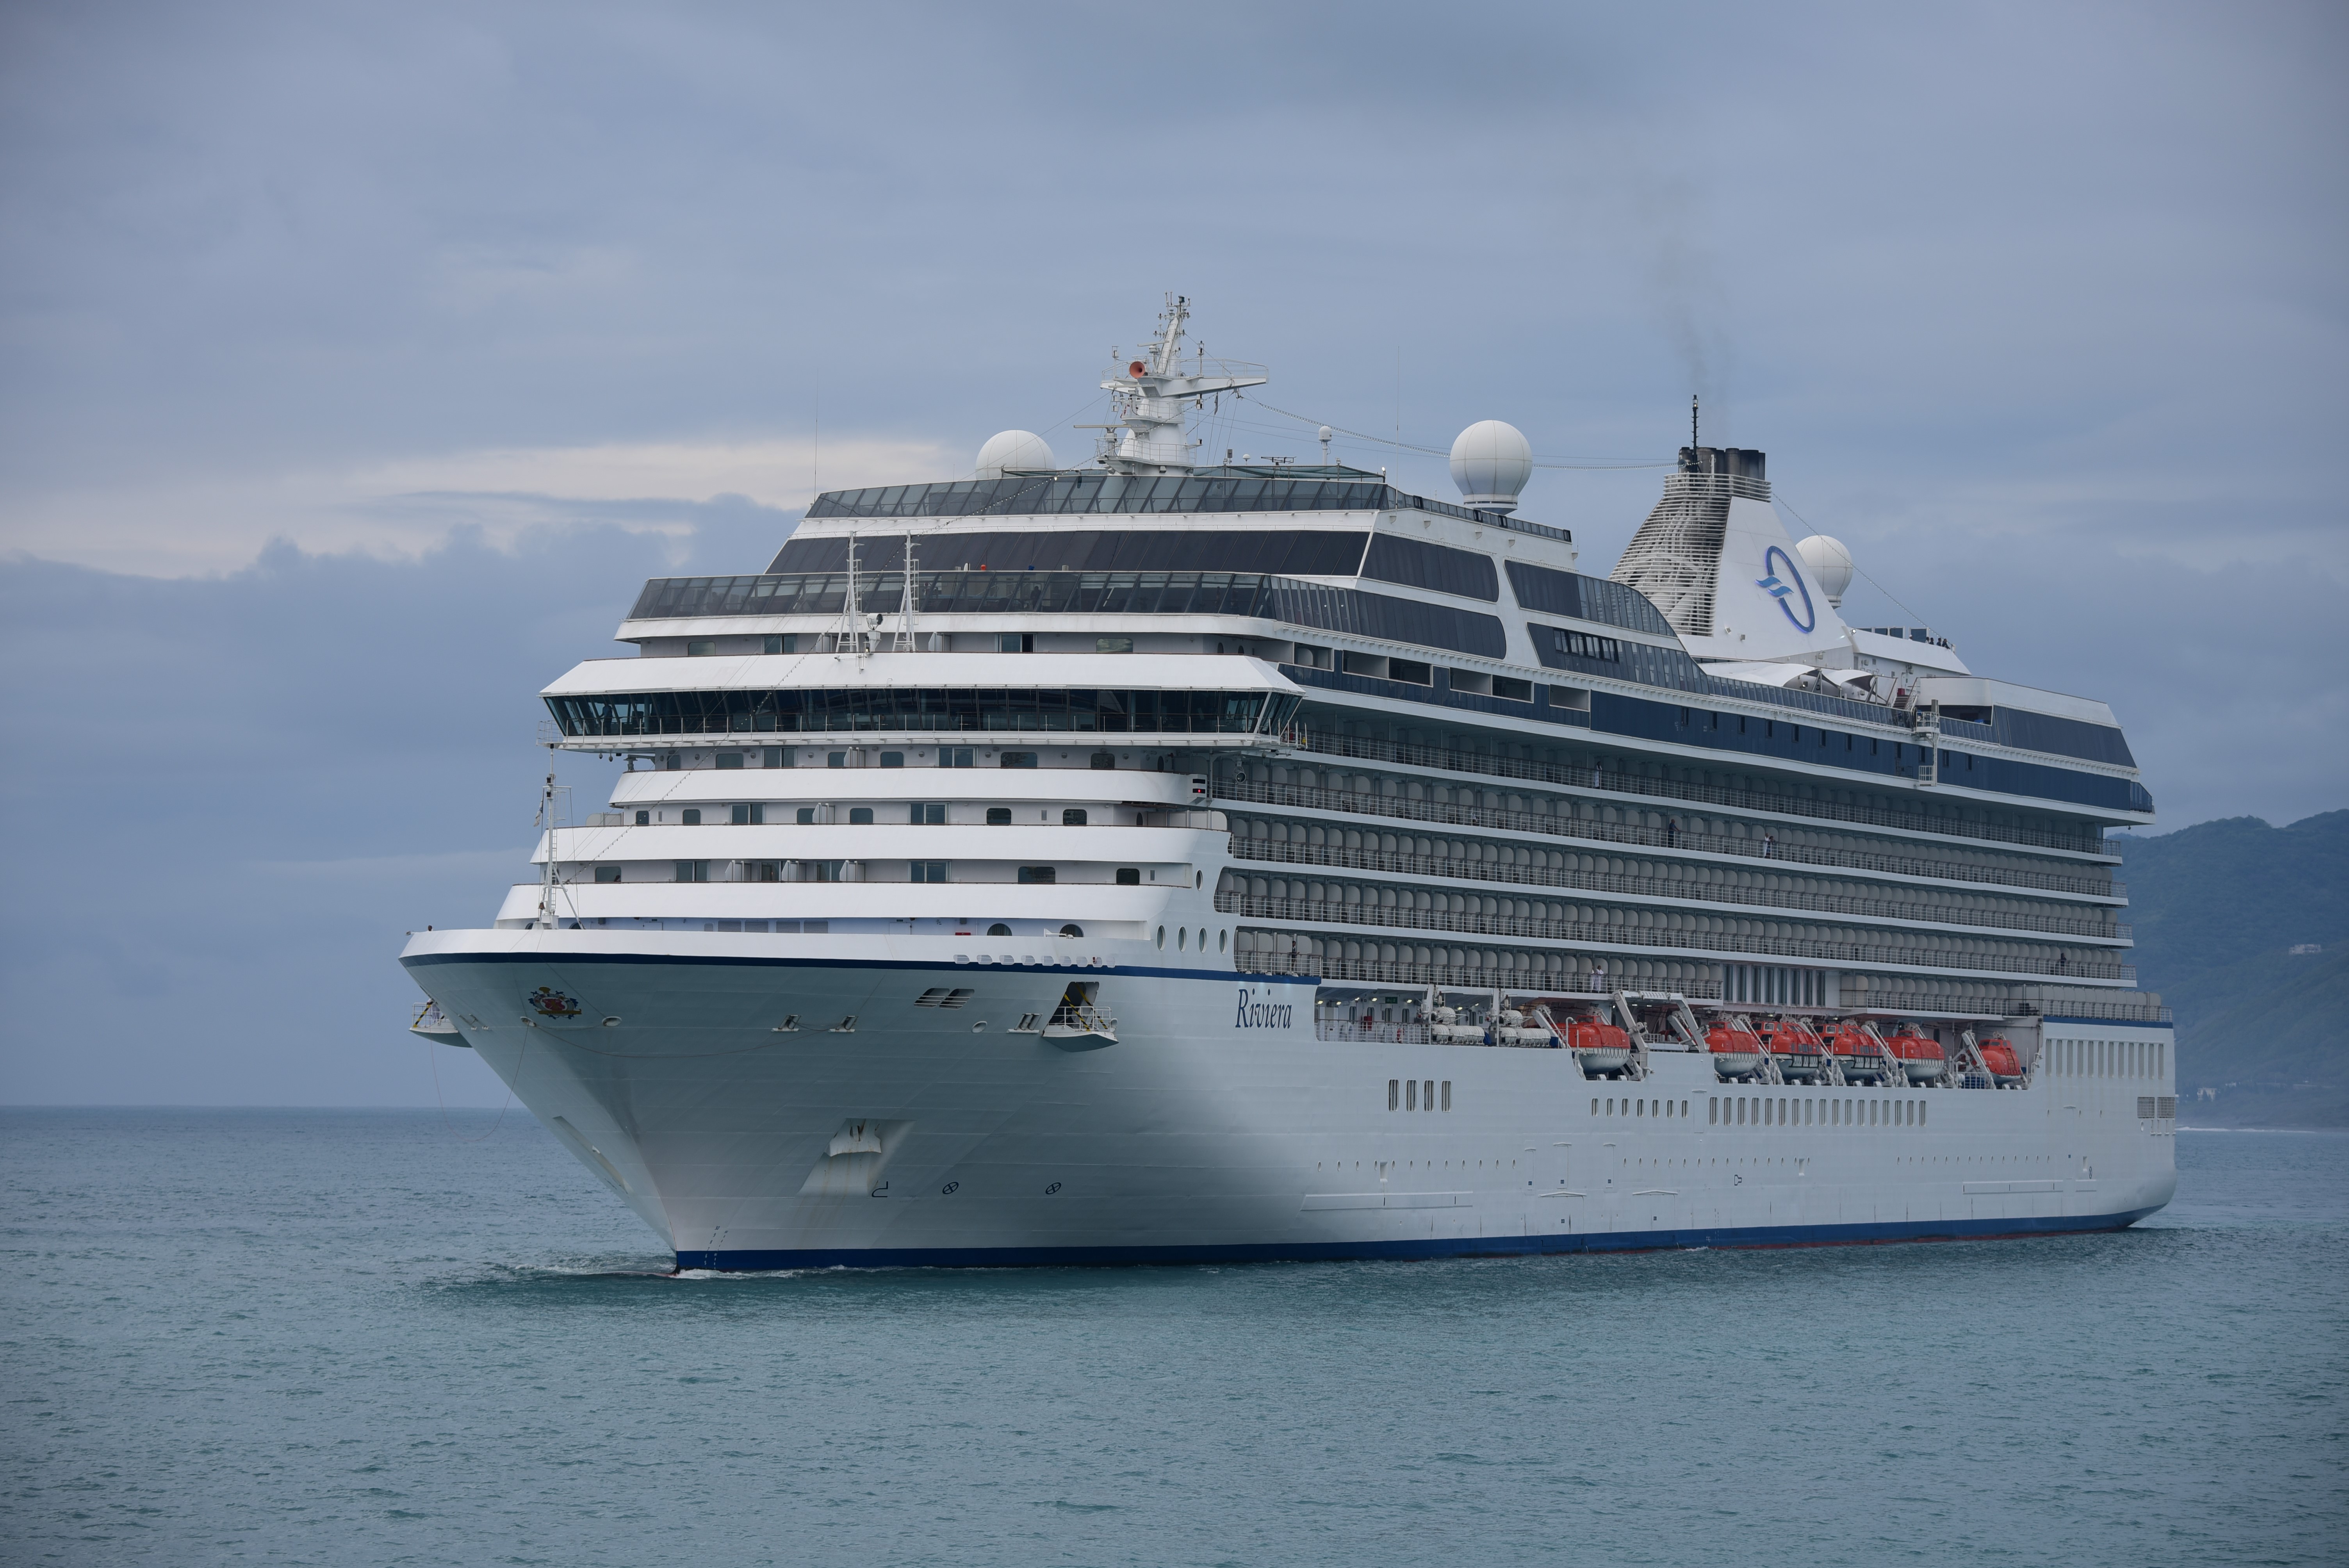 Image 1. Oceania Cruises’ MS Riviera approaching Port of Hualien on Feb. 29th, 2024